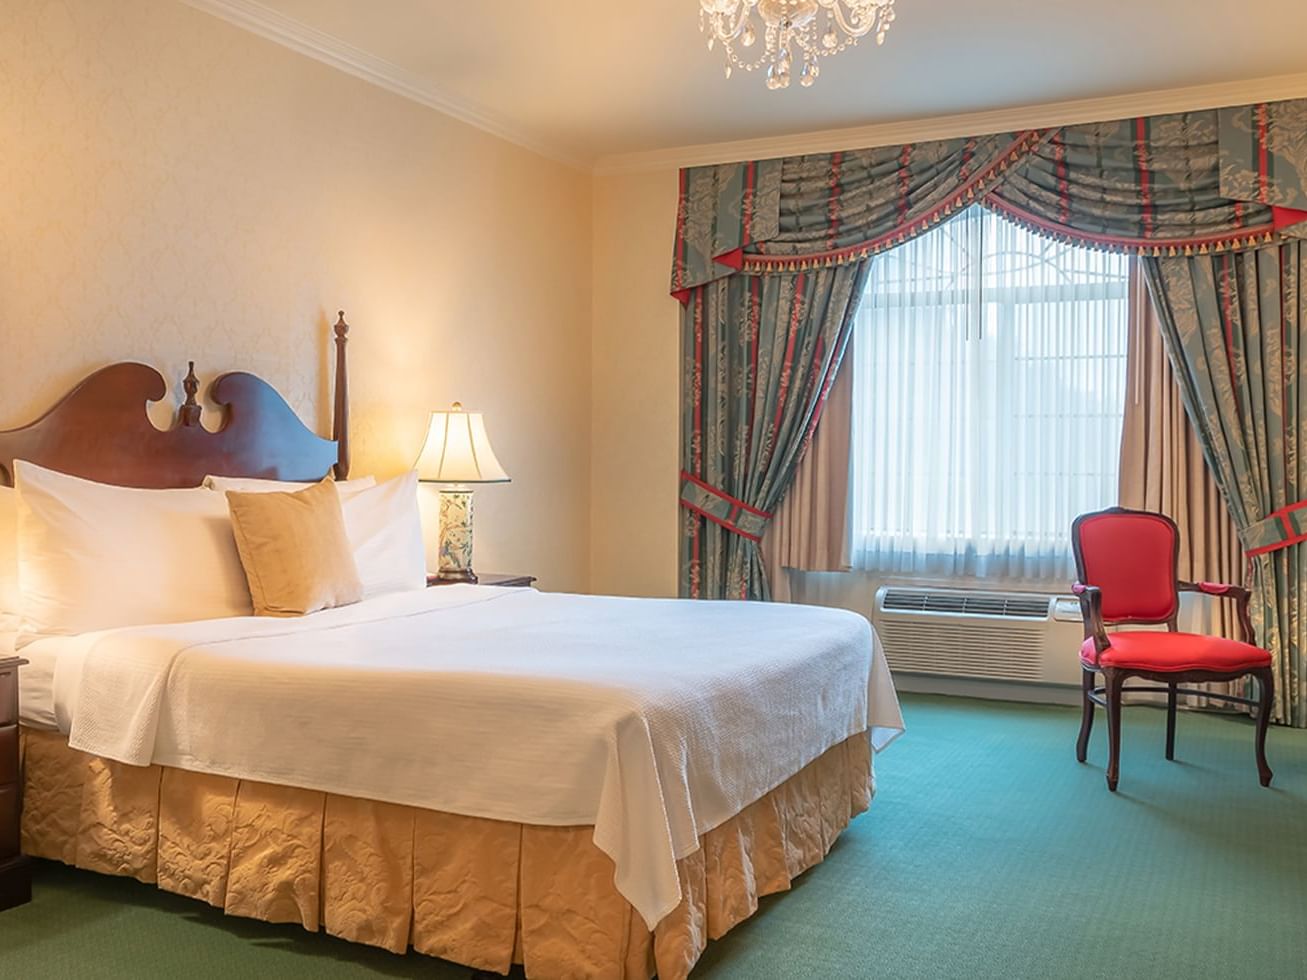 Bristol Boutique Hotel Campbell San Jose - Executive Suite King Bed Cherrywood furniture and curtains flanking window 